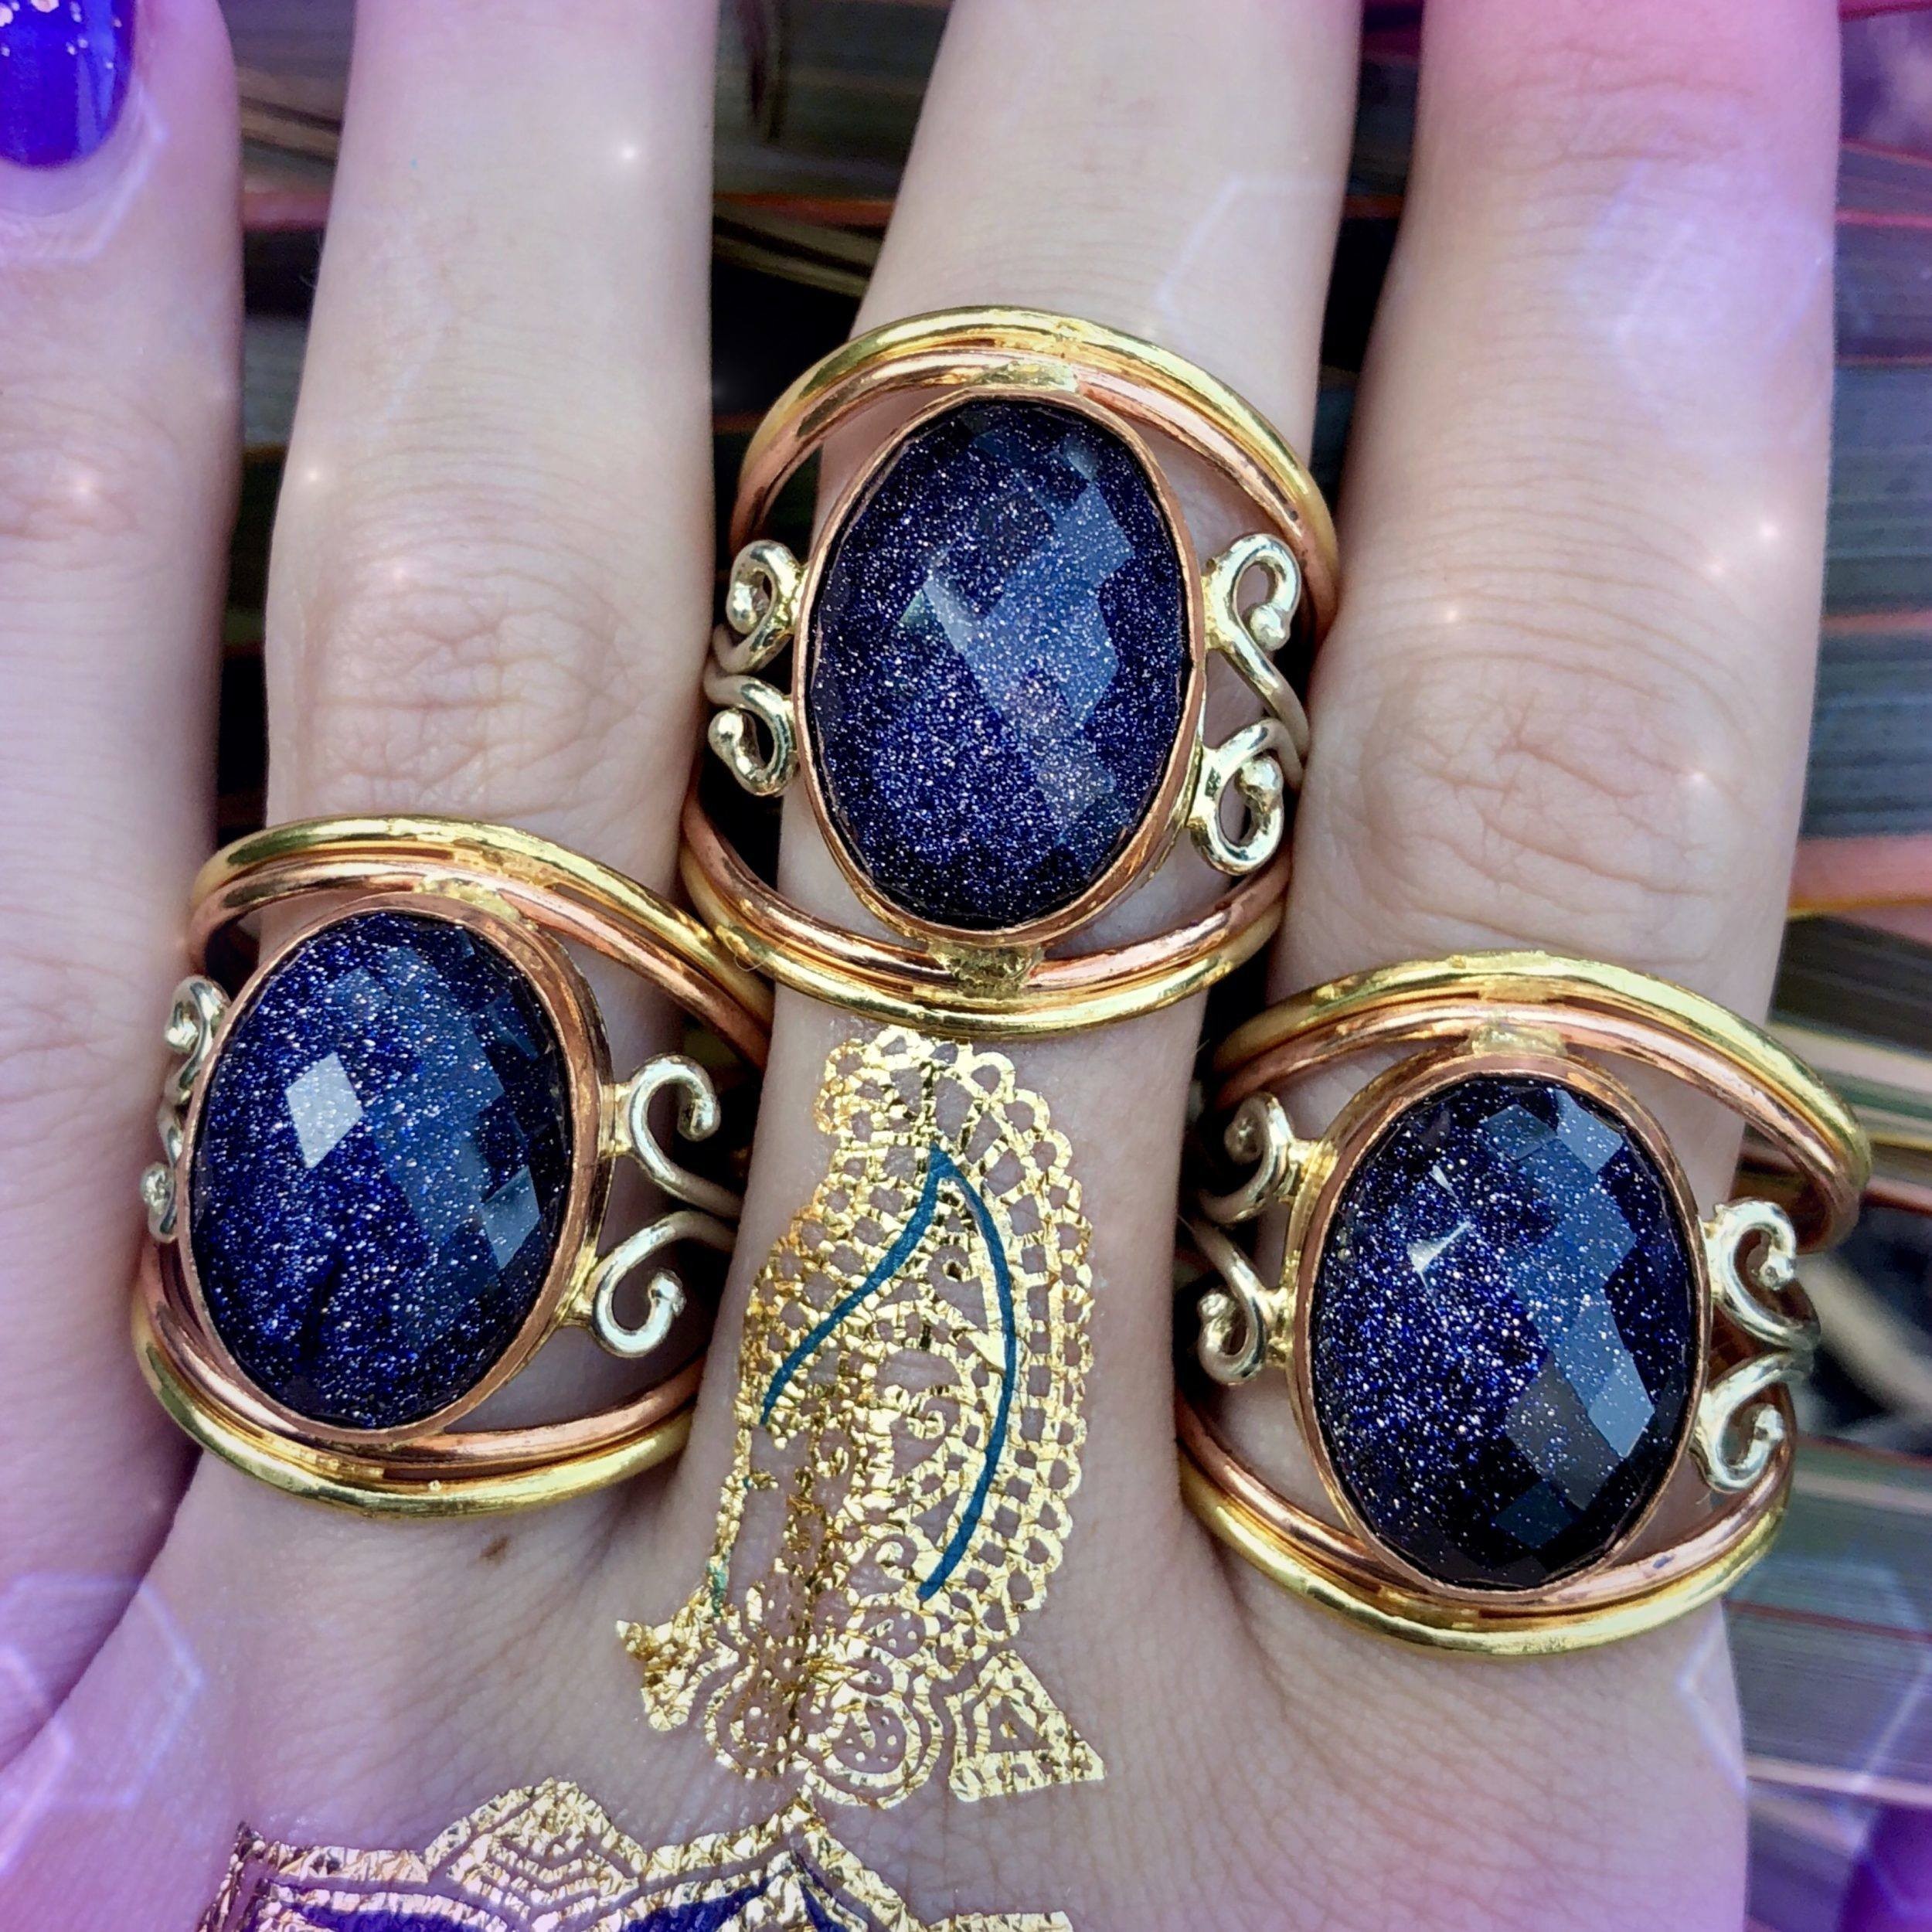 Divine Connection Rings for authentic expression, wisdom, and balance